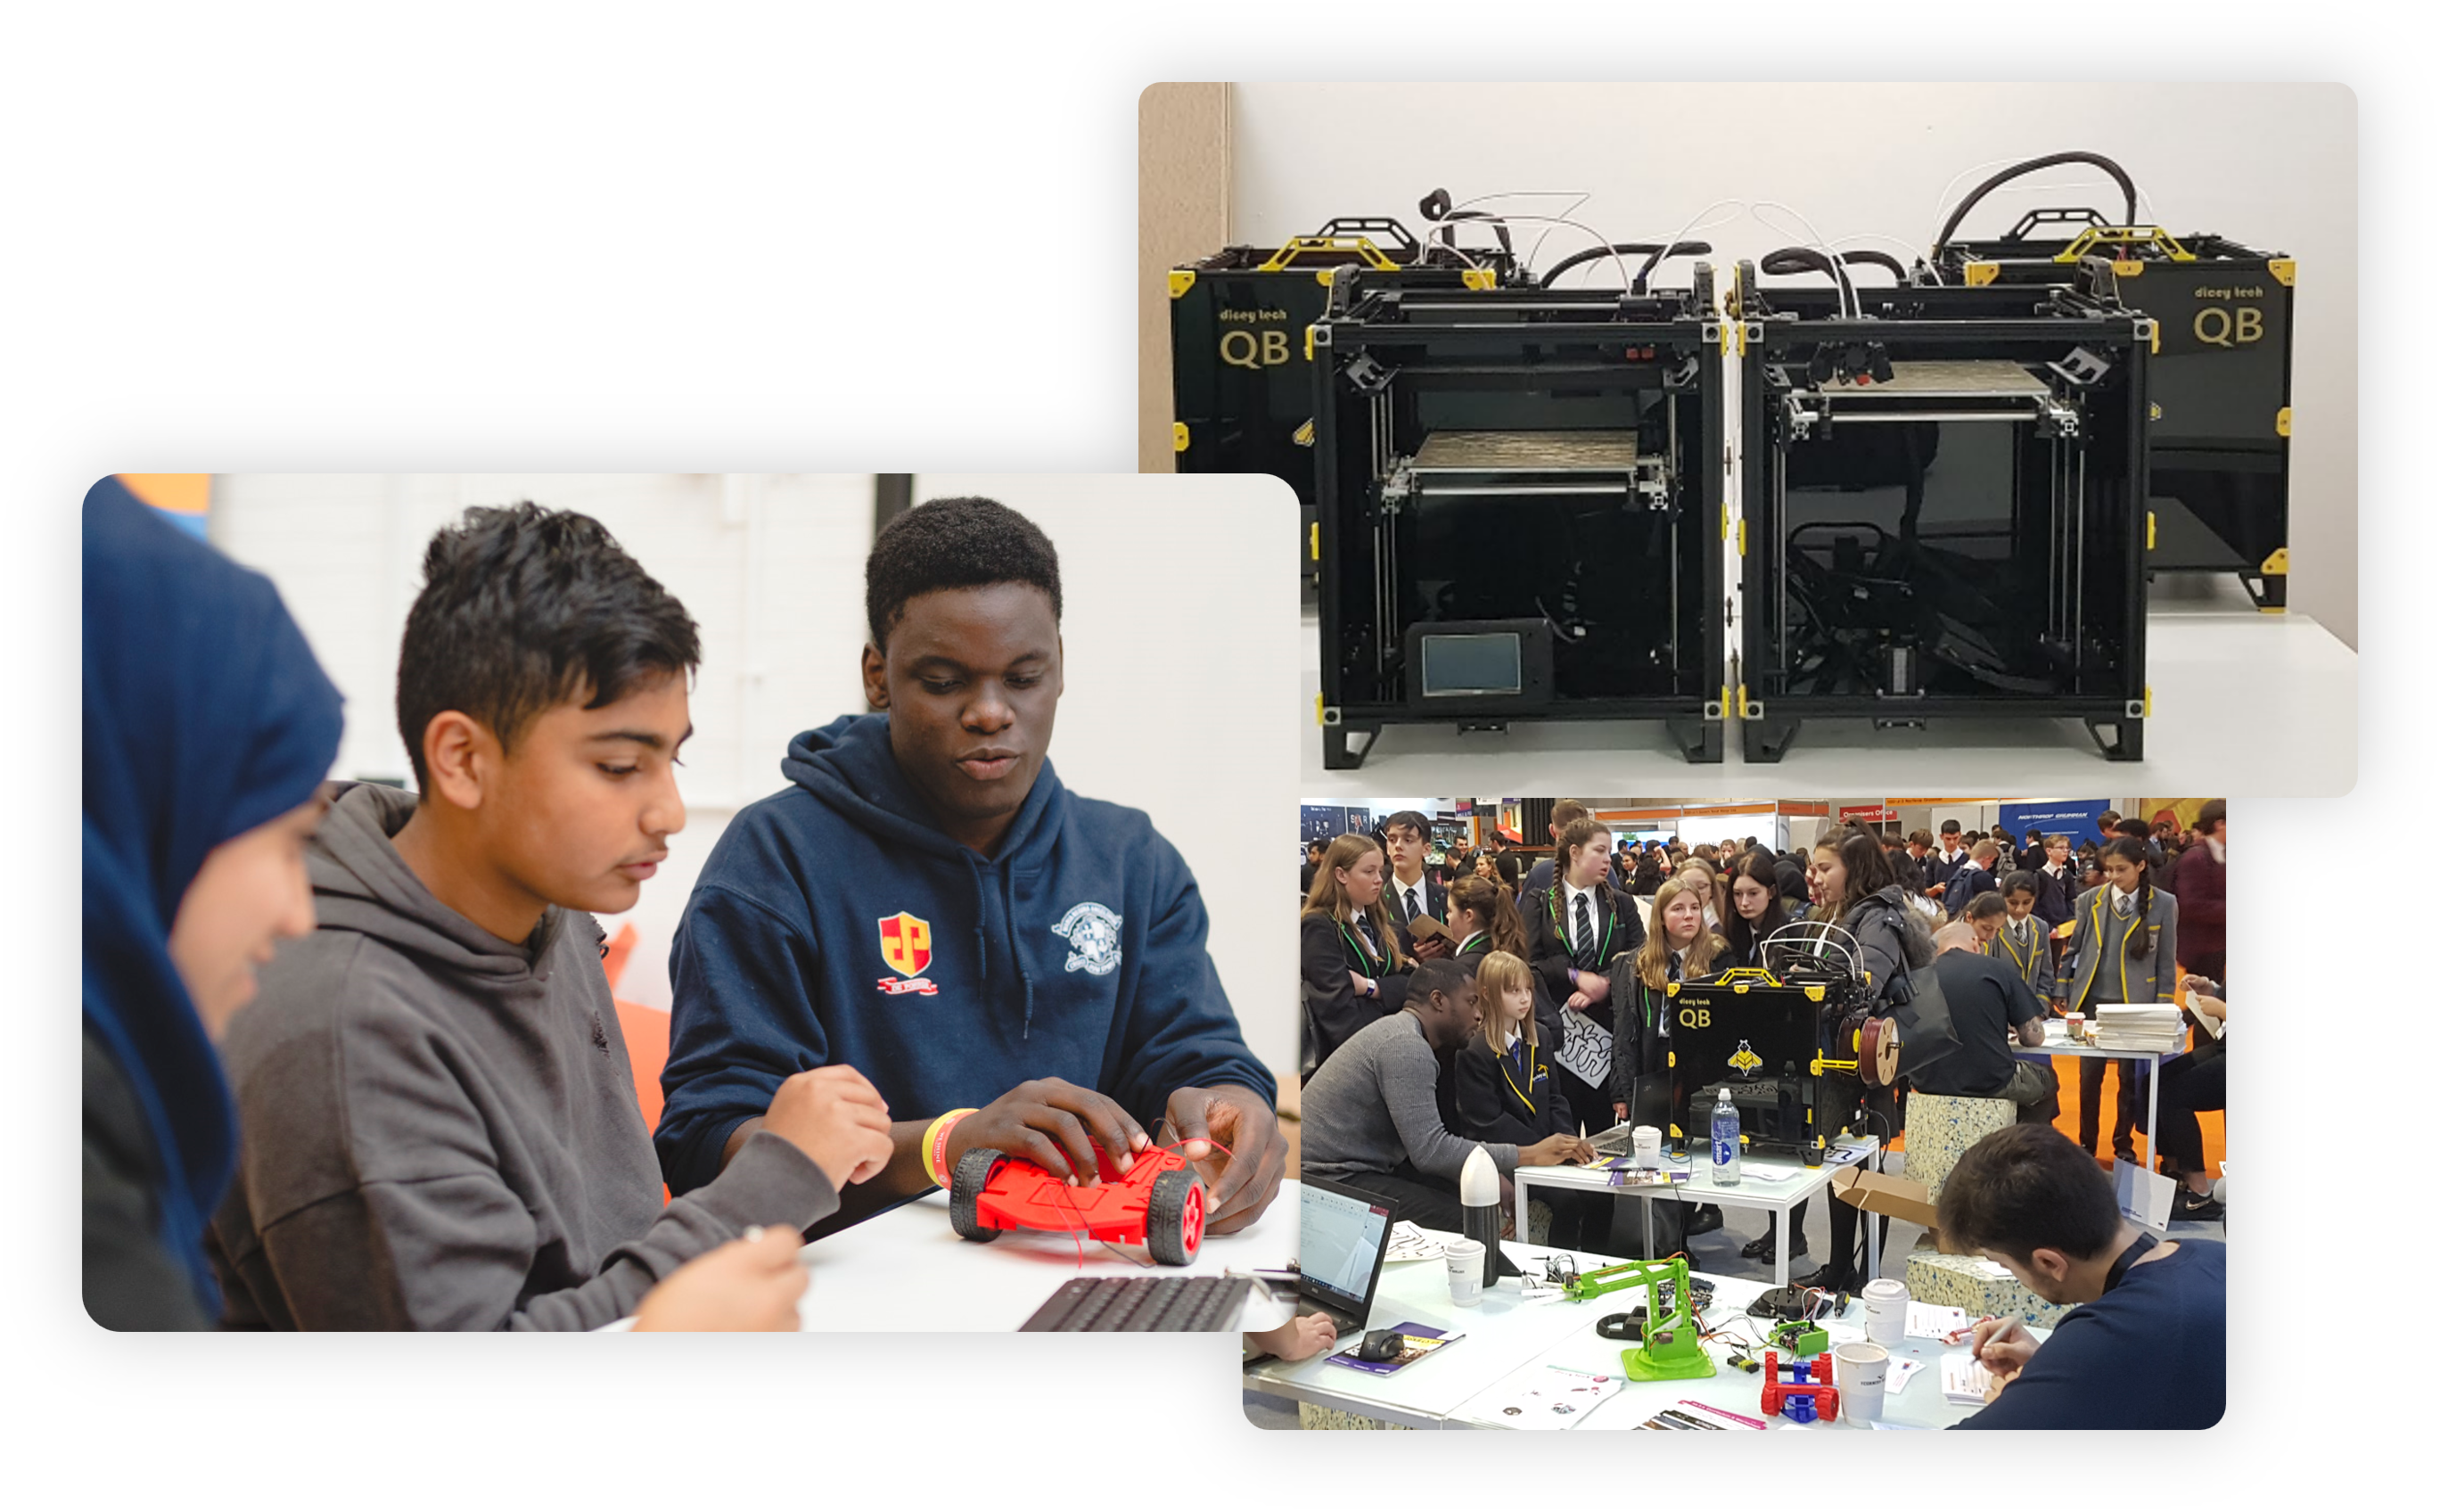 3D printers and students learning to design, code, and make